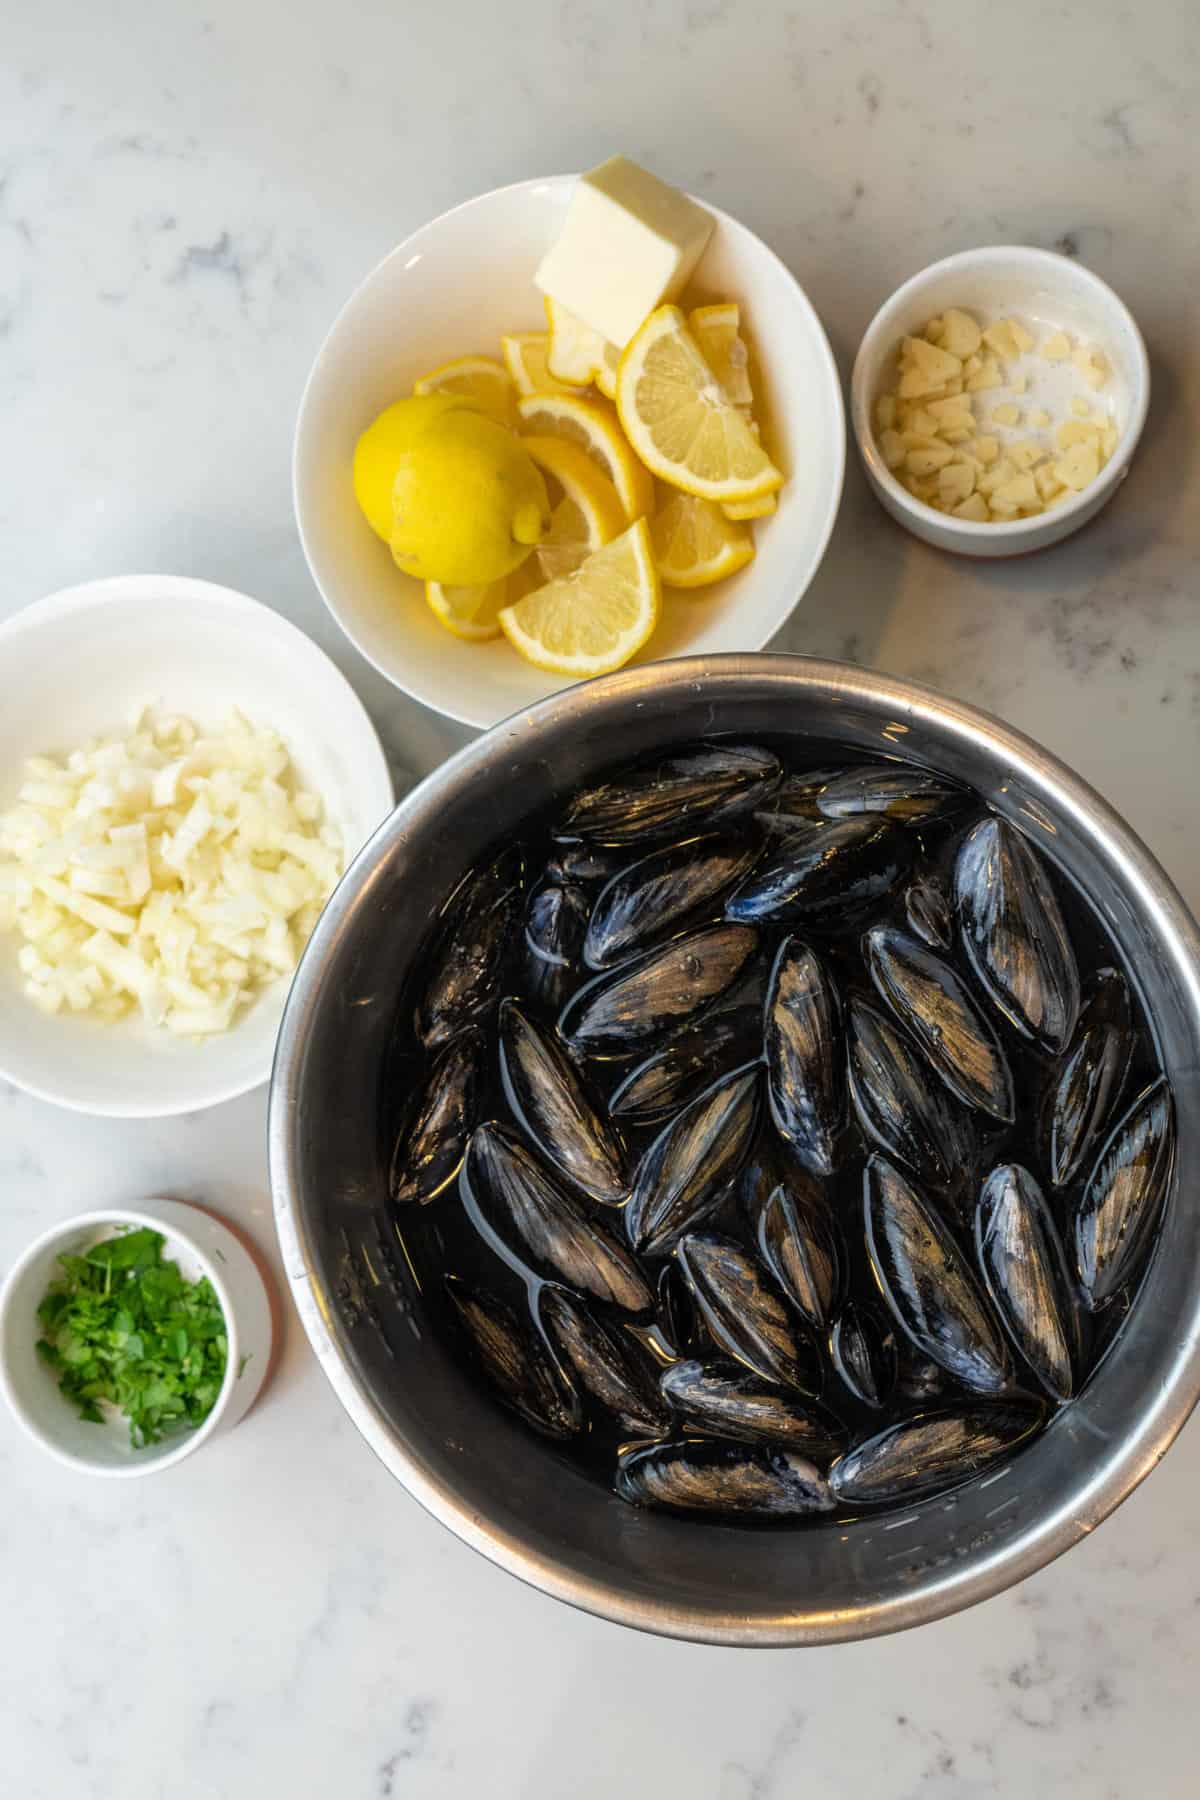 Toss any mussels that haven't opened. This means they died before the cooking process. This is important to make this Butter Garlic Mussels in White Wine Cream Sauce. 